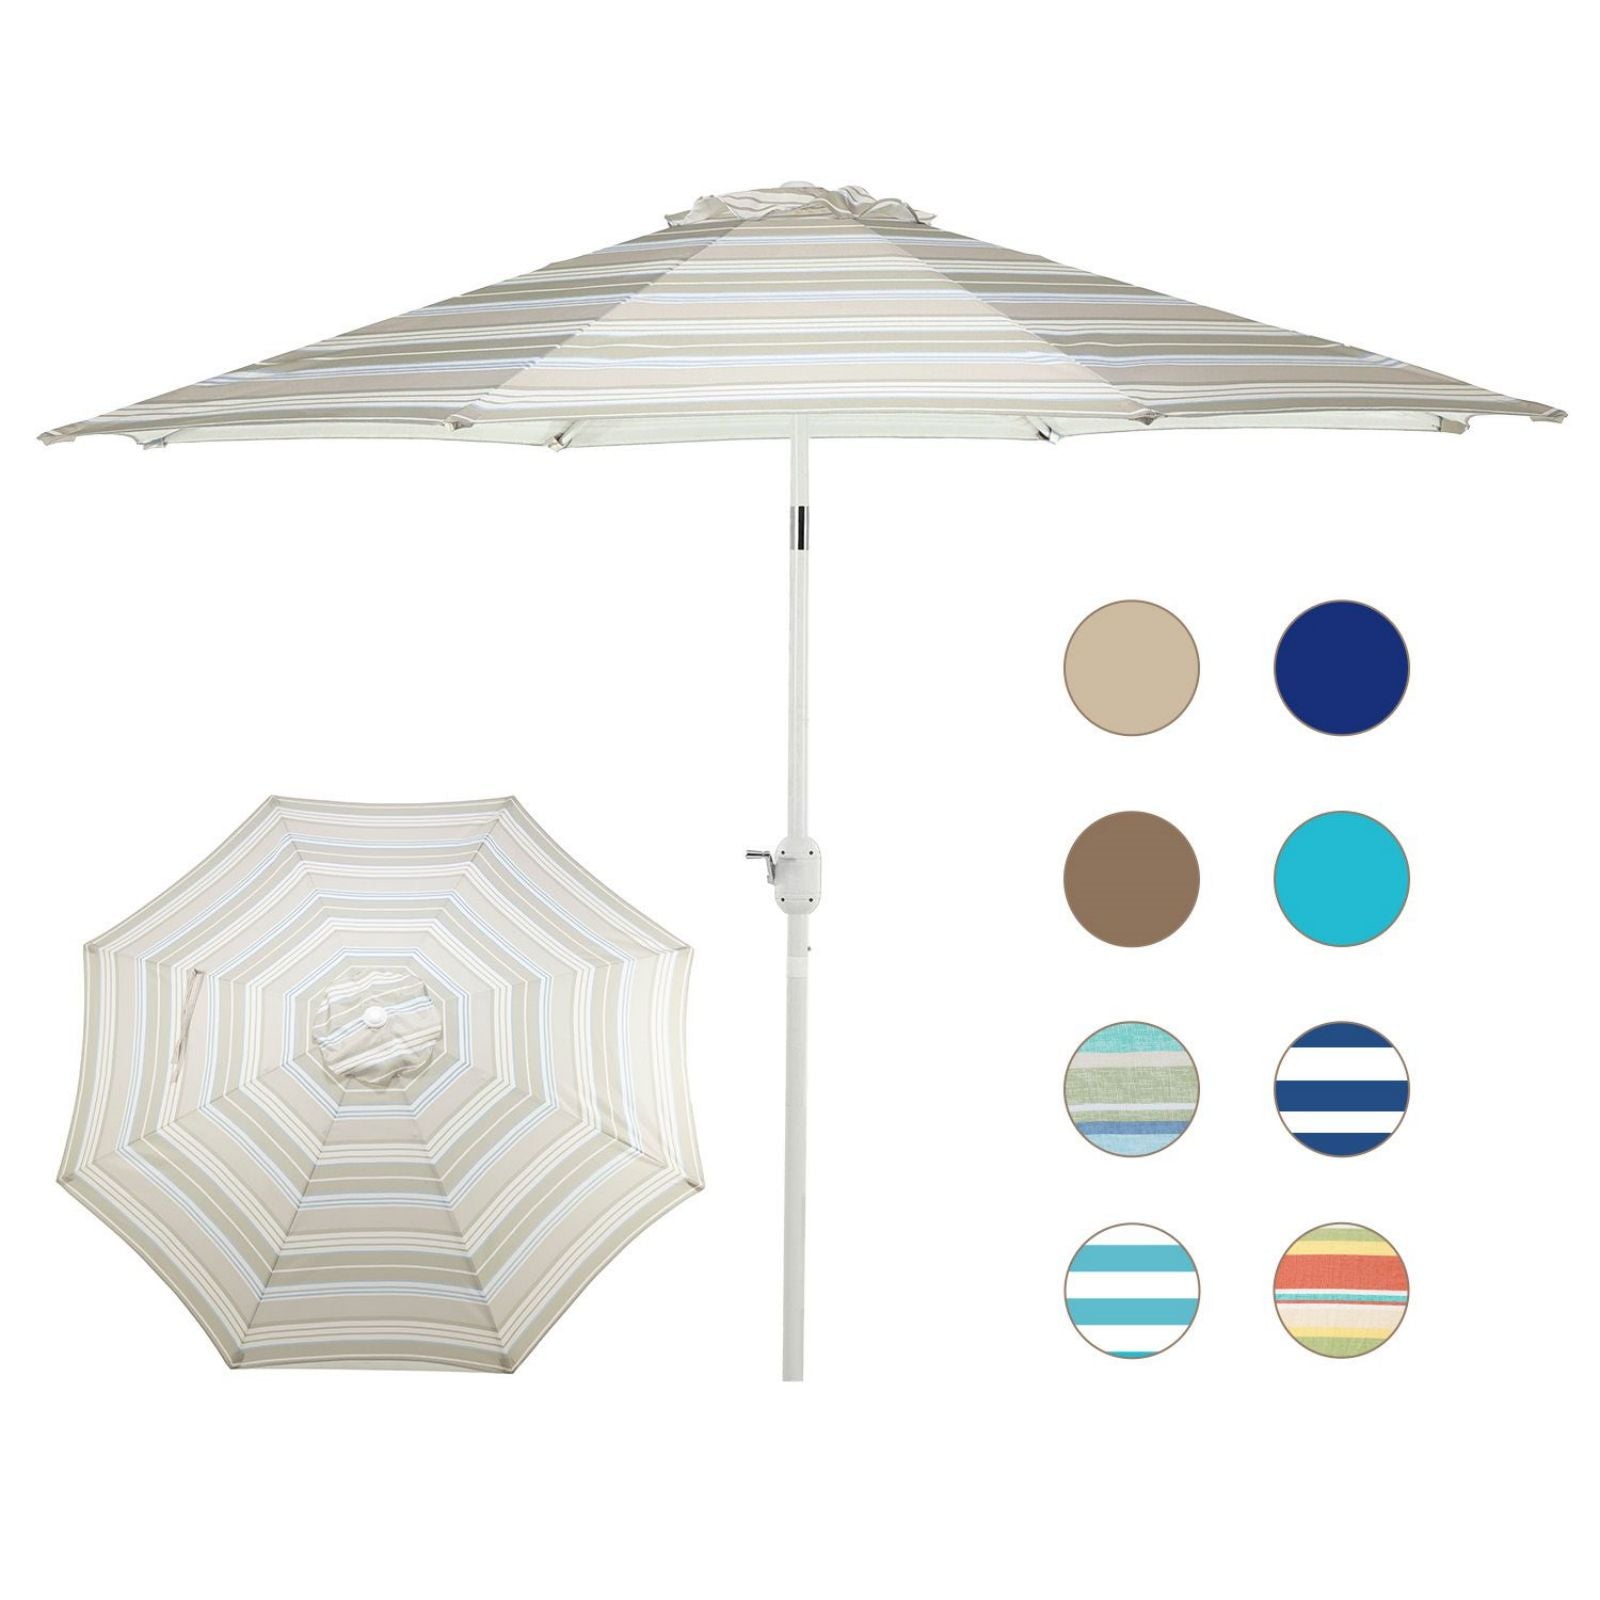 9FT Outdoor Patio Market Umbrella Aluminum Frame with Push Button Tilt Crank and 8 Steel Ribs, UV Protection  Aoodor  Khaki and Blue  